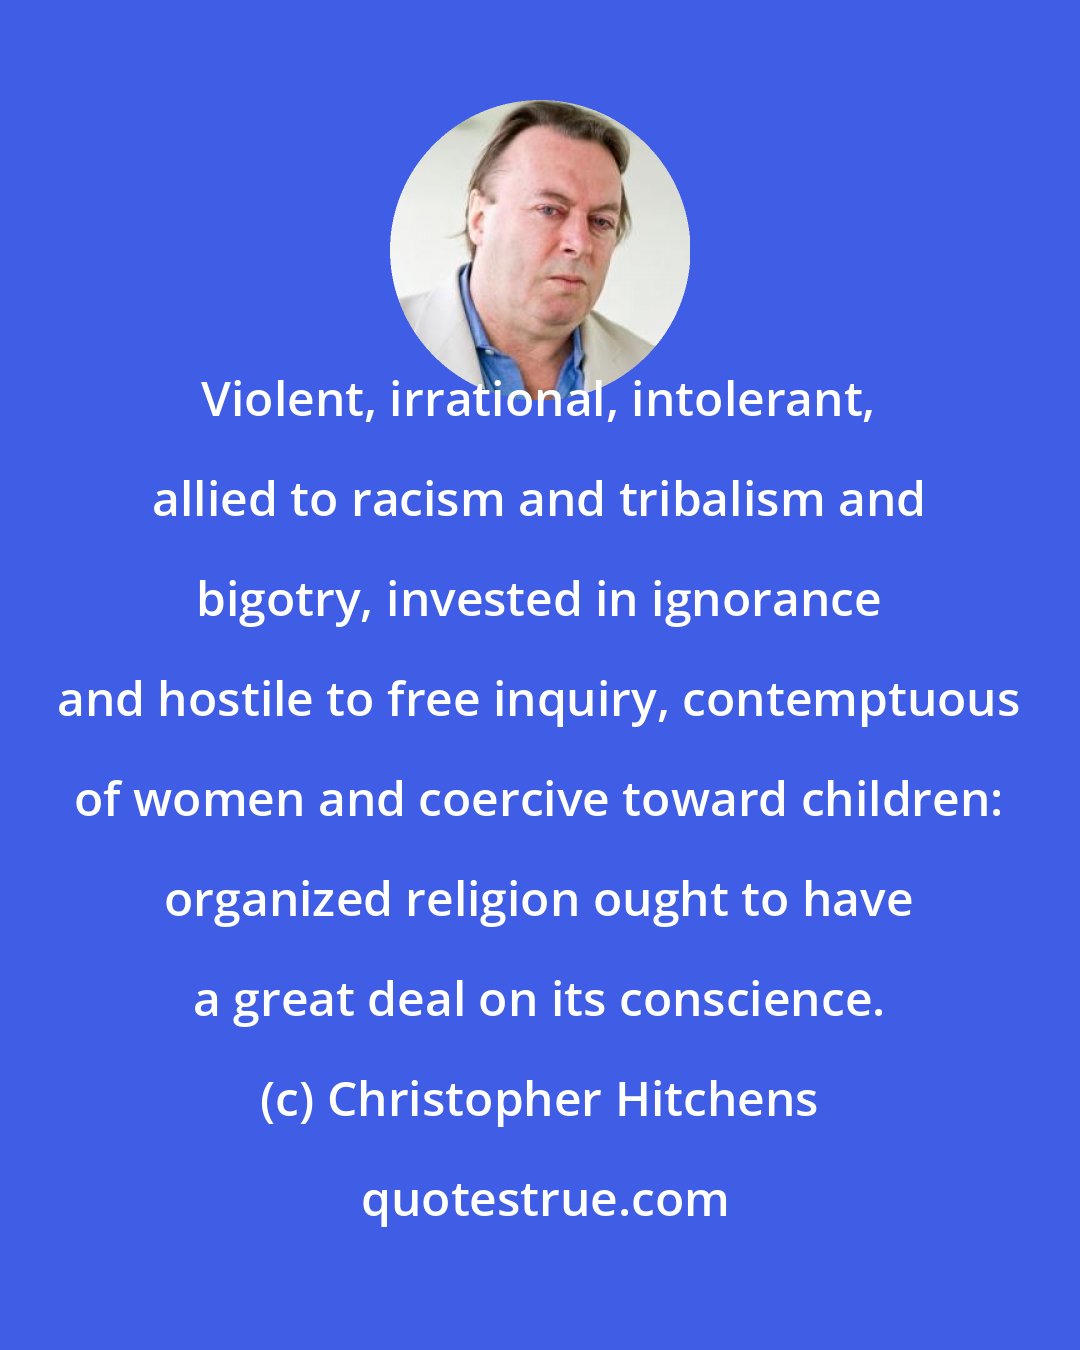 Christopher Hitchens: Violent, irrational, intolerant, allied to racism and tribalism and bigotry, invested in ignorance and hostile to free inquiry, contemptuous of women and coercive toward children: organized religion ought to have a great deal on its conscience.